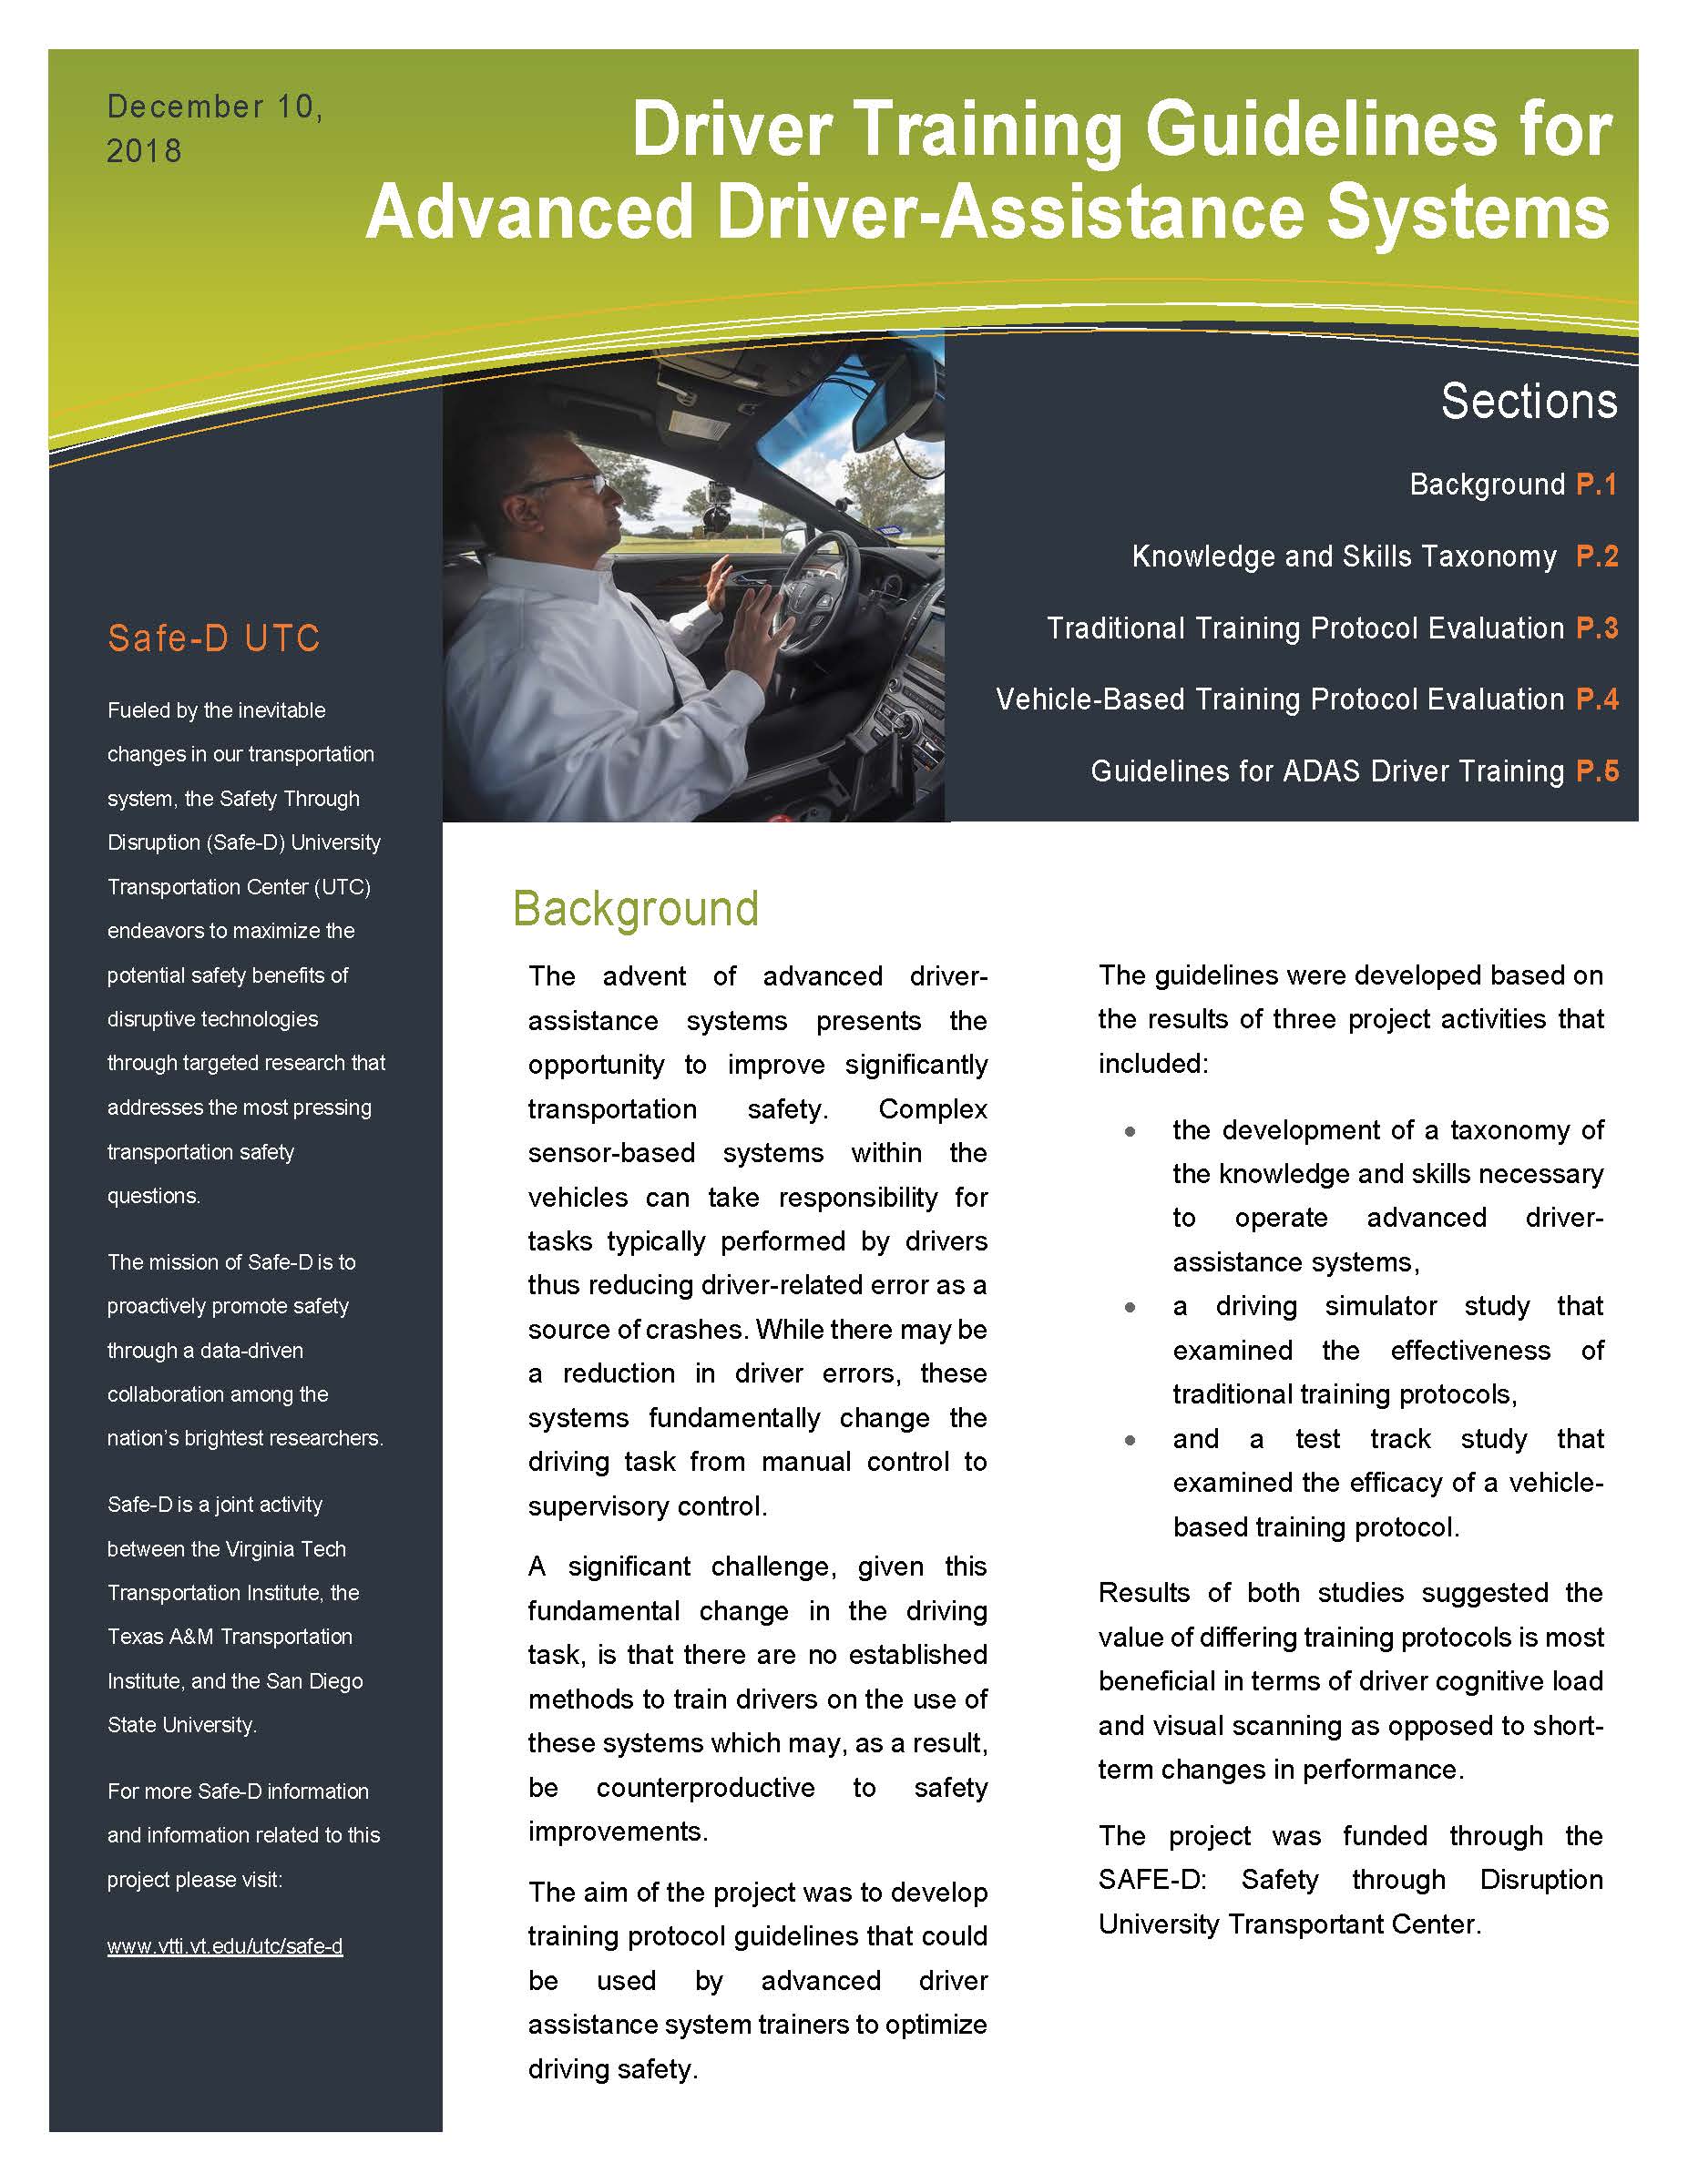 Driver Training Guidelines for Advanced Driver-Assistance Systems